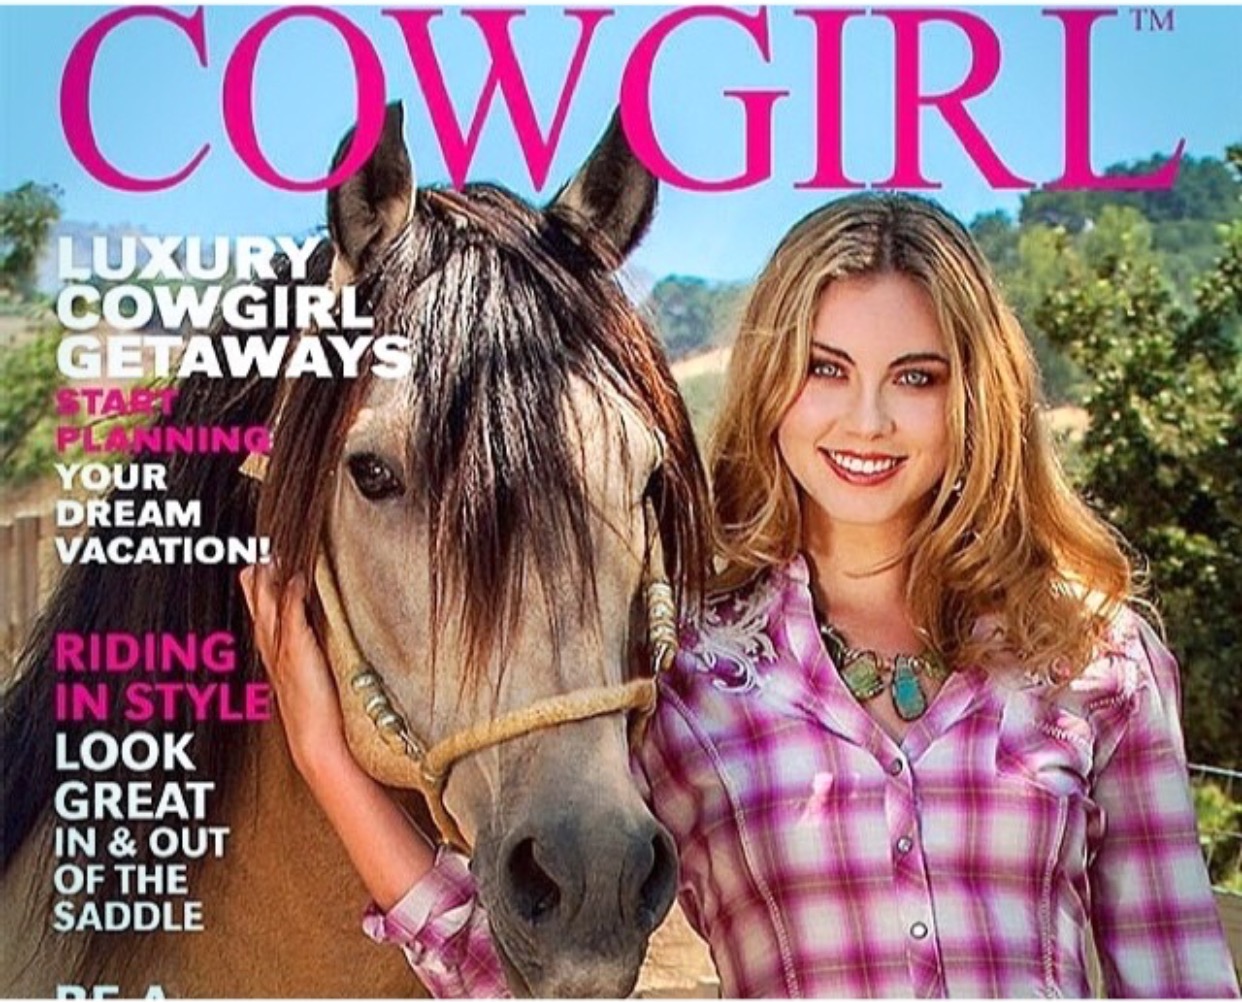 Natalie on her second cover of Cowgirl Magazine, 2014 spring edition.